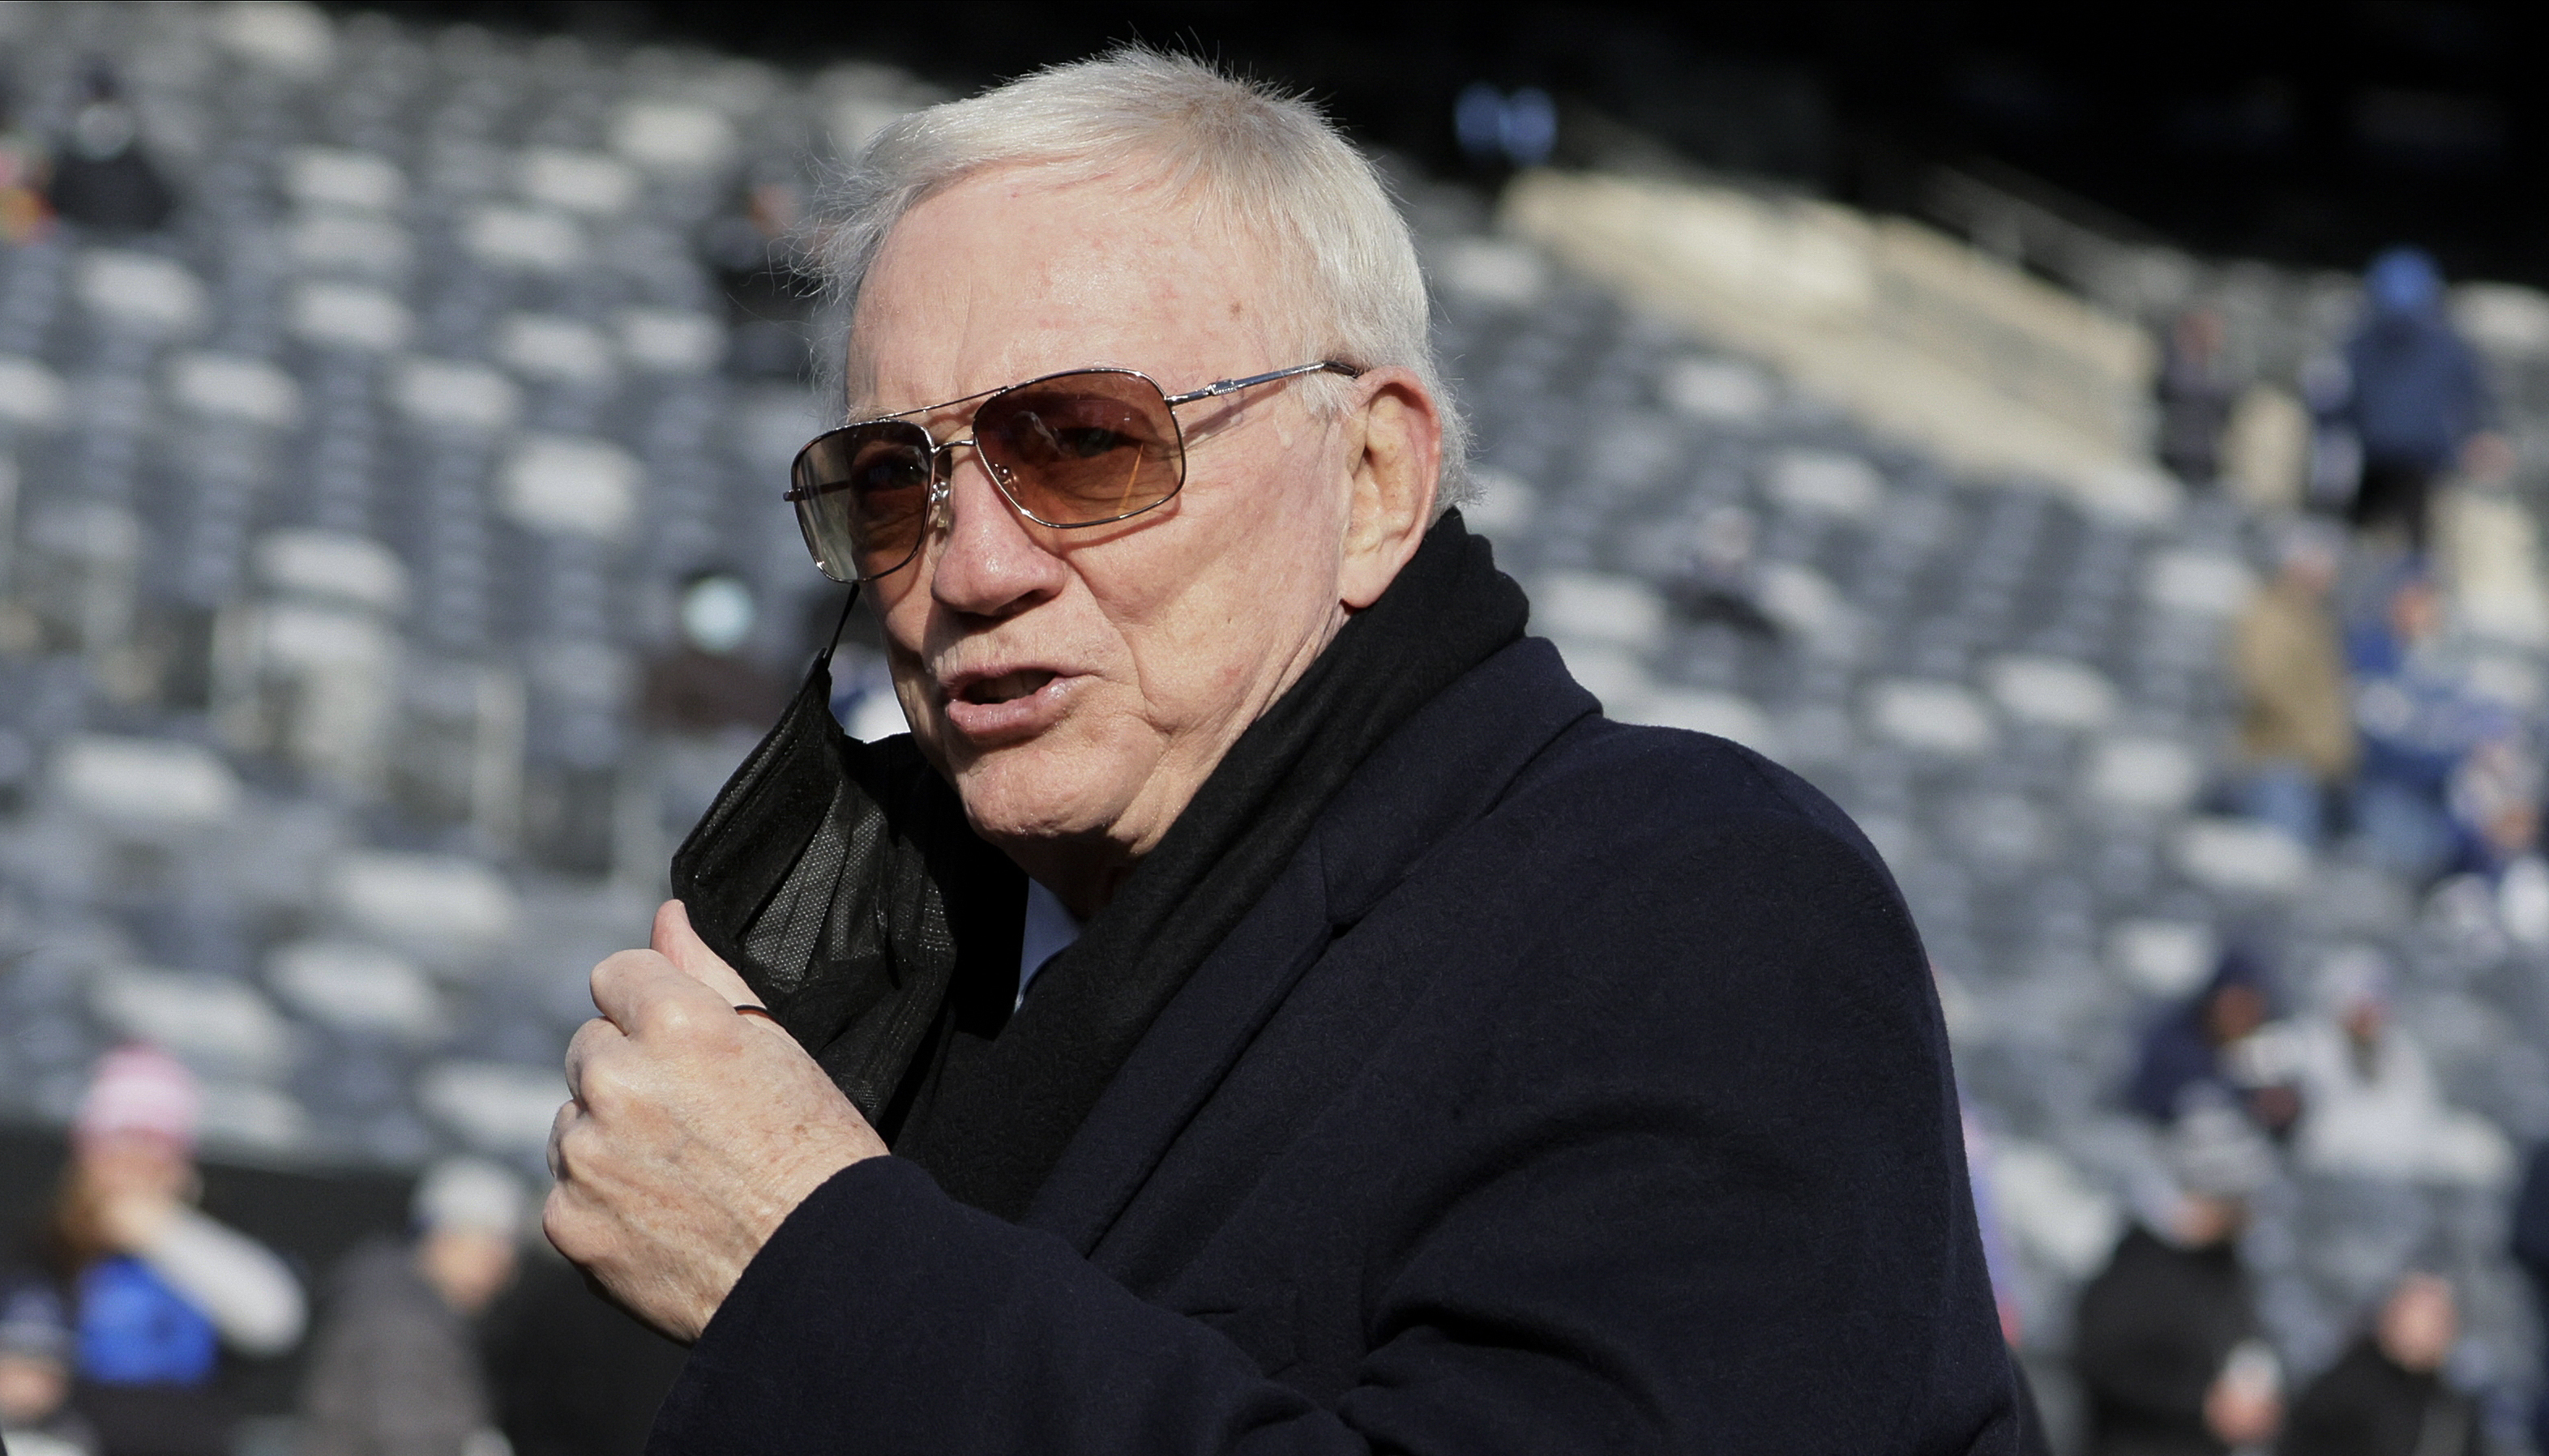 Woman sues Cowboys' Jerry Jones, alleges he's her biological father